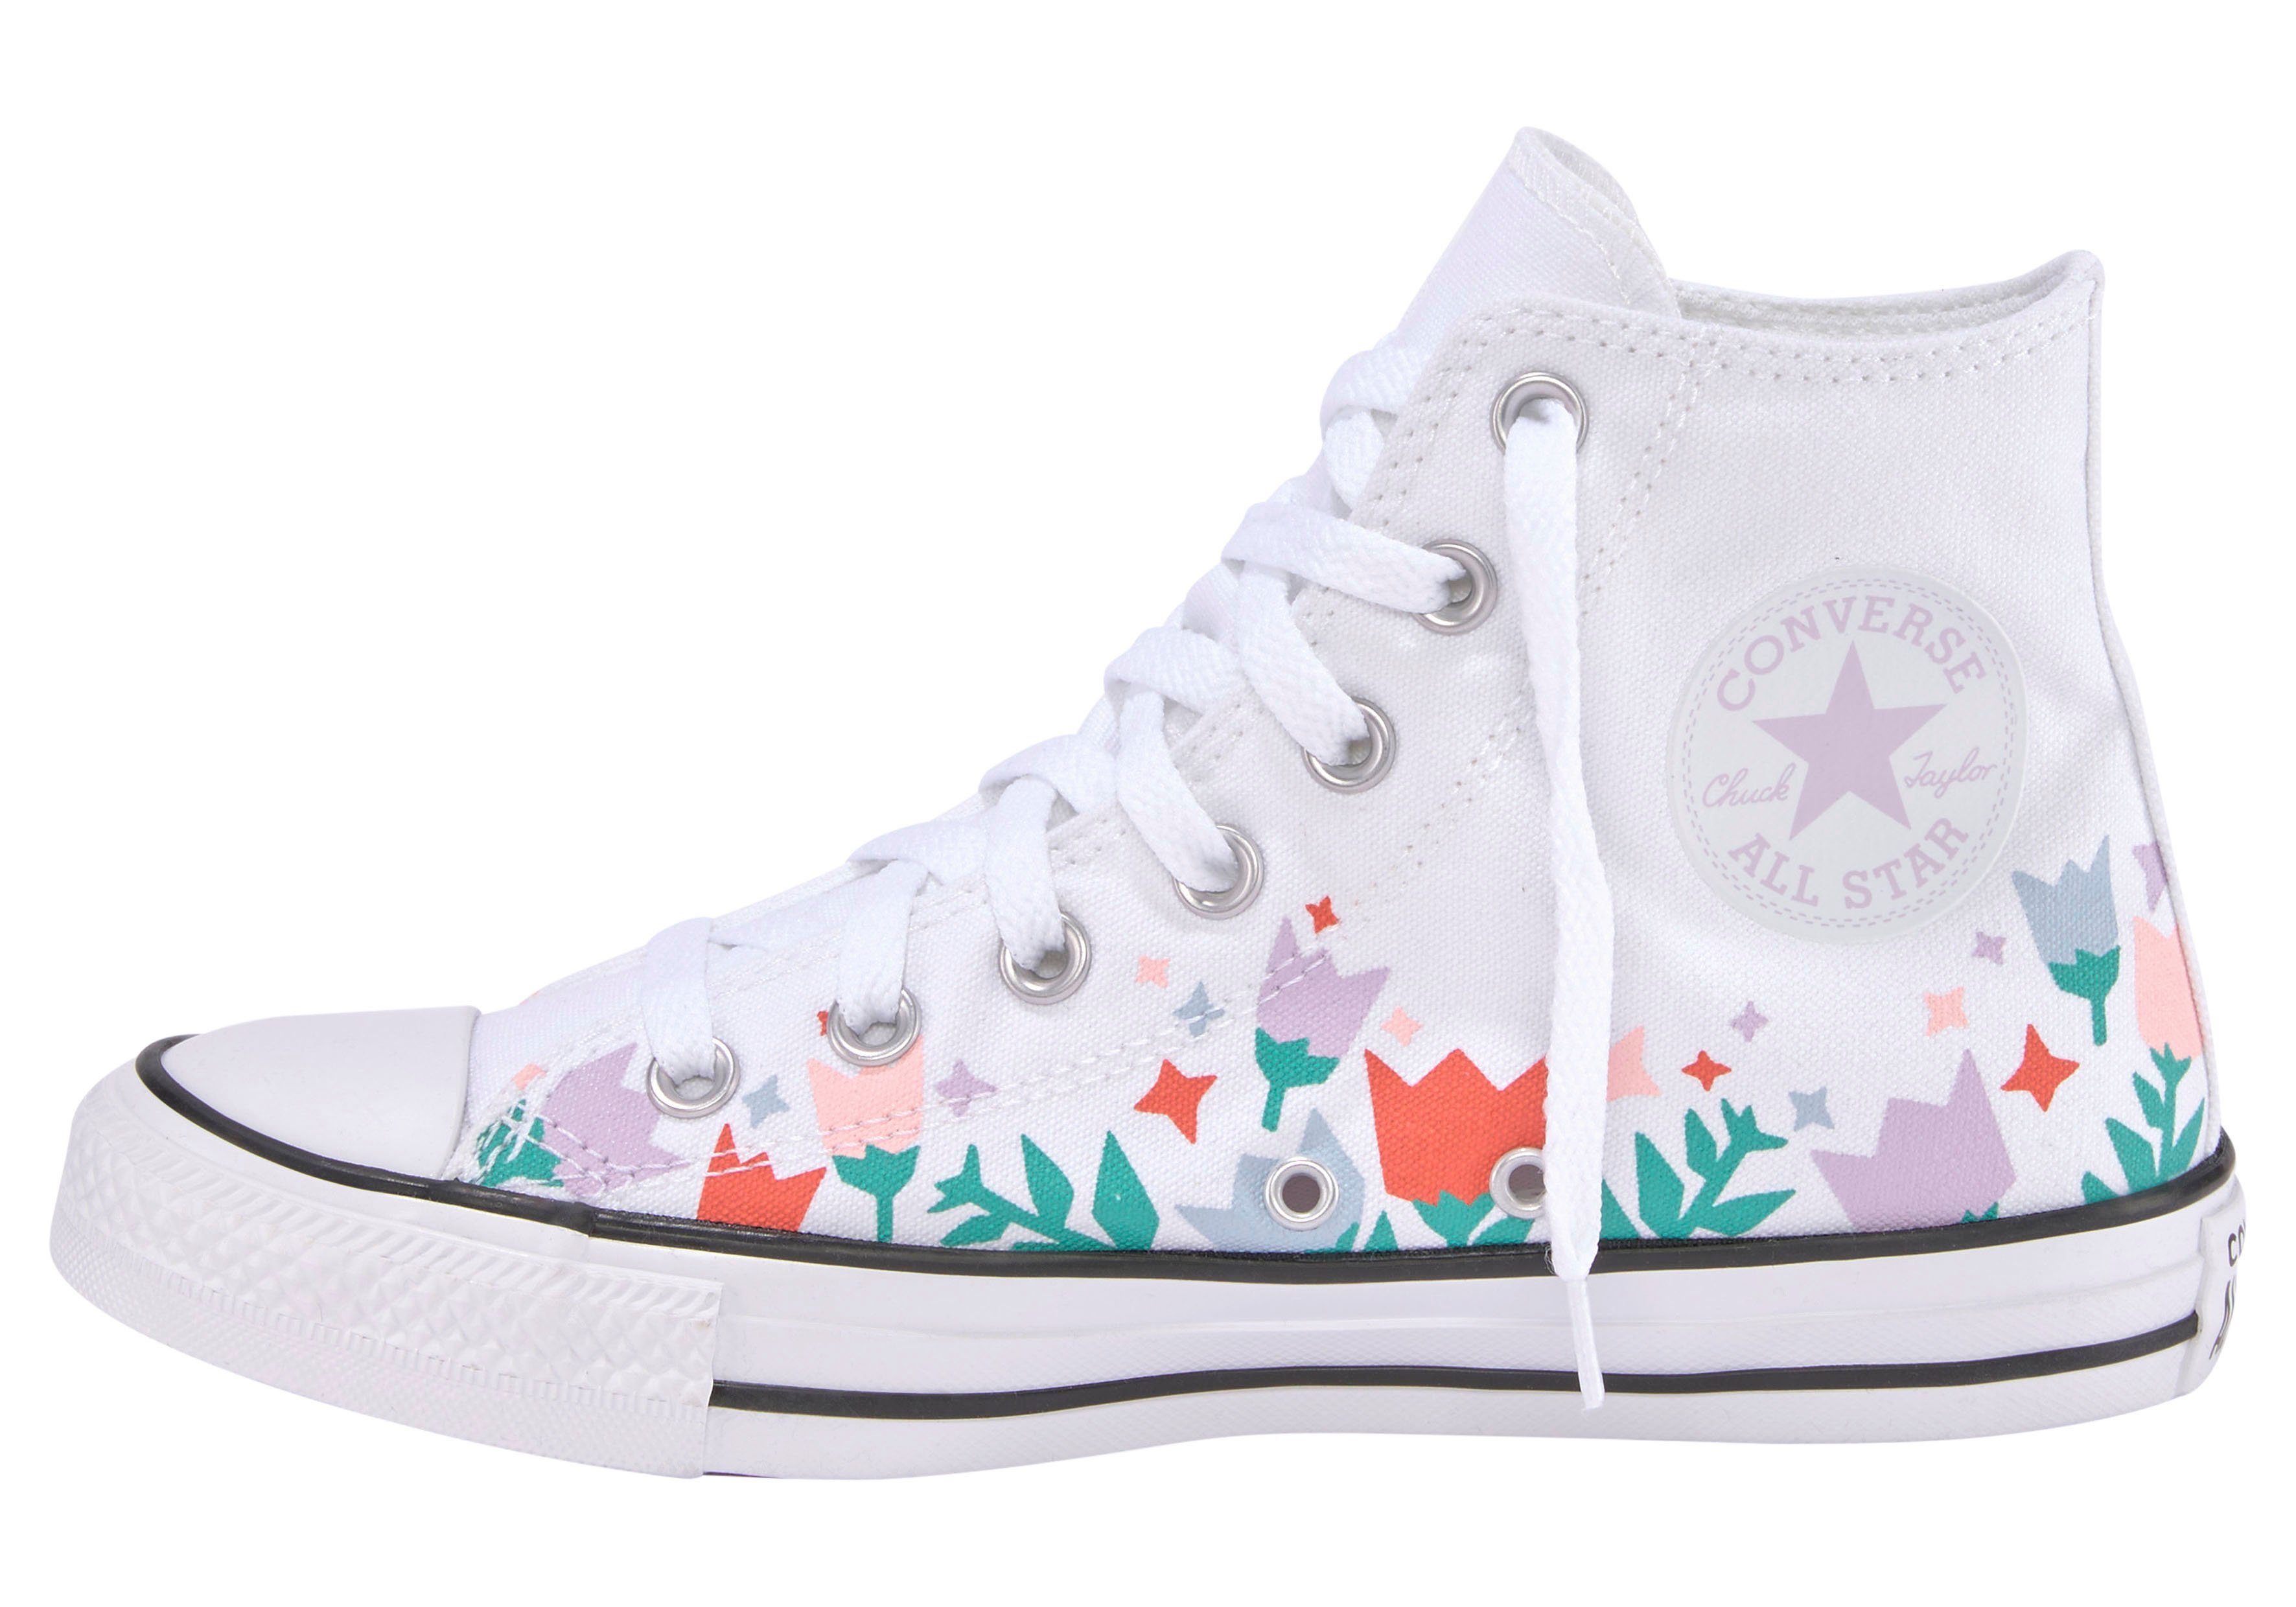 Converse »CHUCK TAYLOR ALL STAR CRAFTED FLORALS HI« Sneaker online kaufen |  OTTO